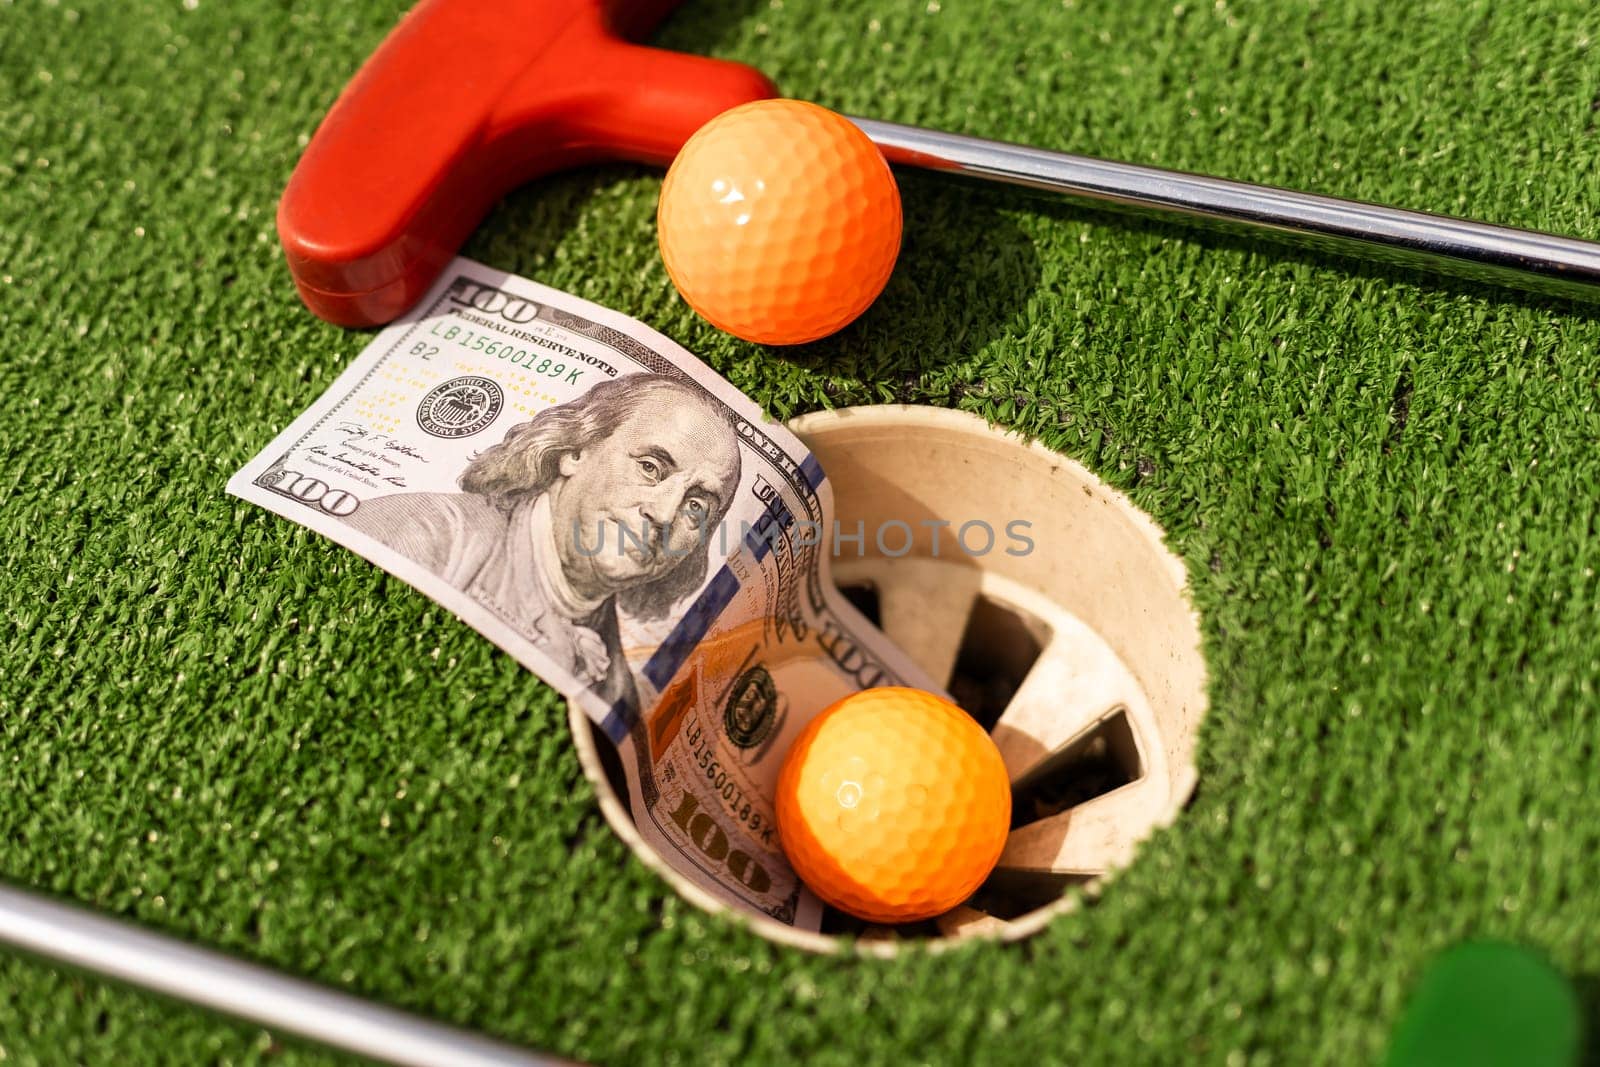 Mini Golf club, ball and money on the artificial grass by Andelov13